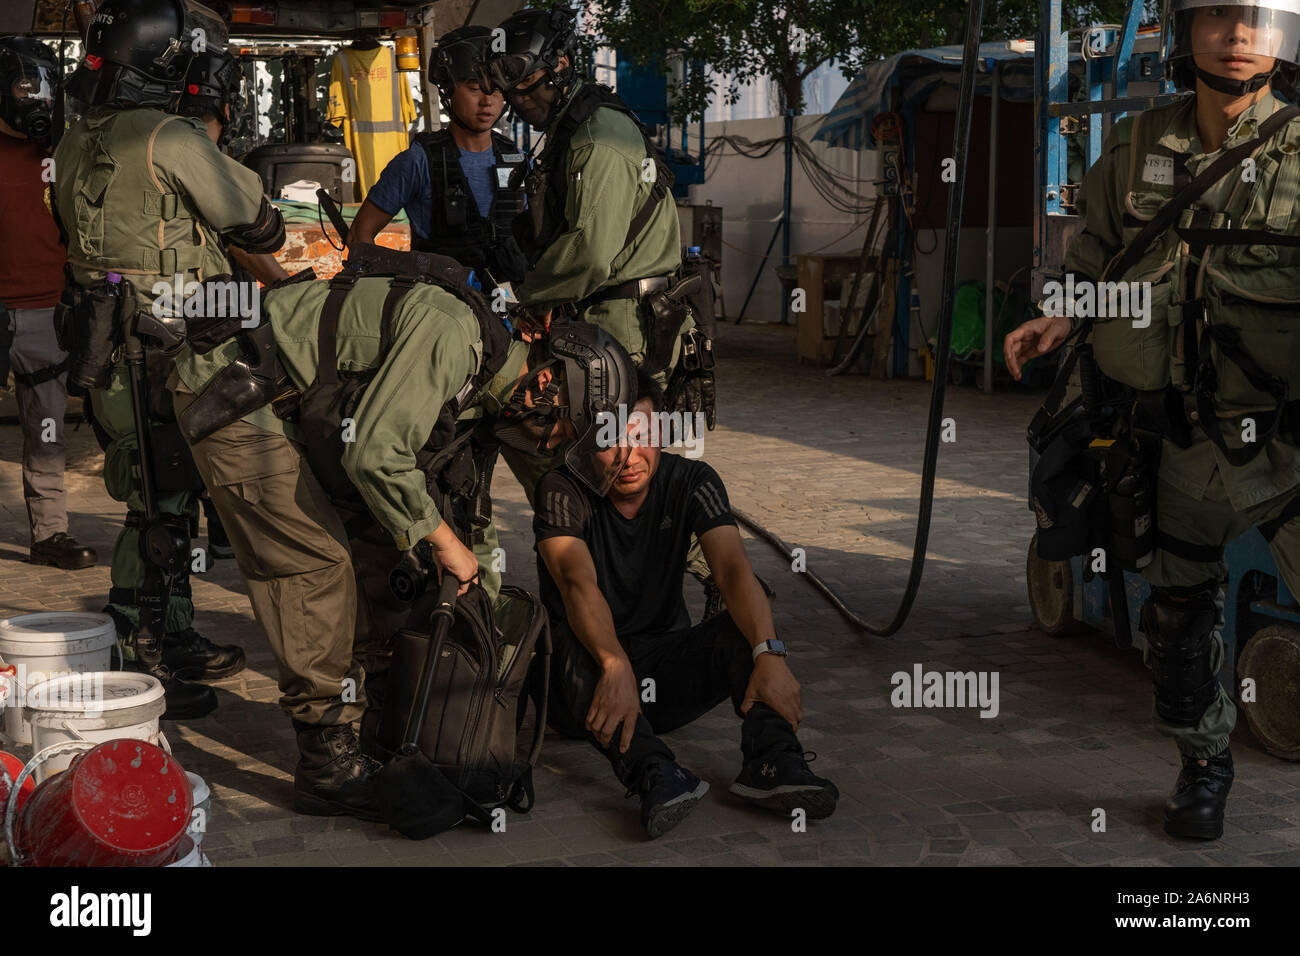 Hong Kong, China. 27th Oct, 2019. A protester being arrested by the police during the demonstration.Hong Kong pro-democracy protesters demonstrated against police brutality in Tsim Sha Tsui. The rally turned into a conflict at night in Mong Kok. Credit: SOPA Images Limited/Alamy Live News Stock Photo